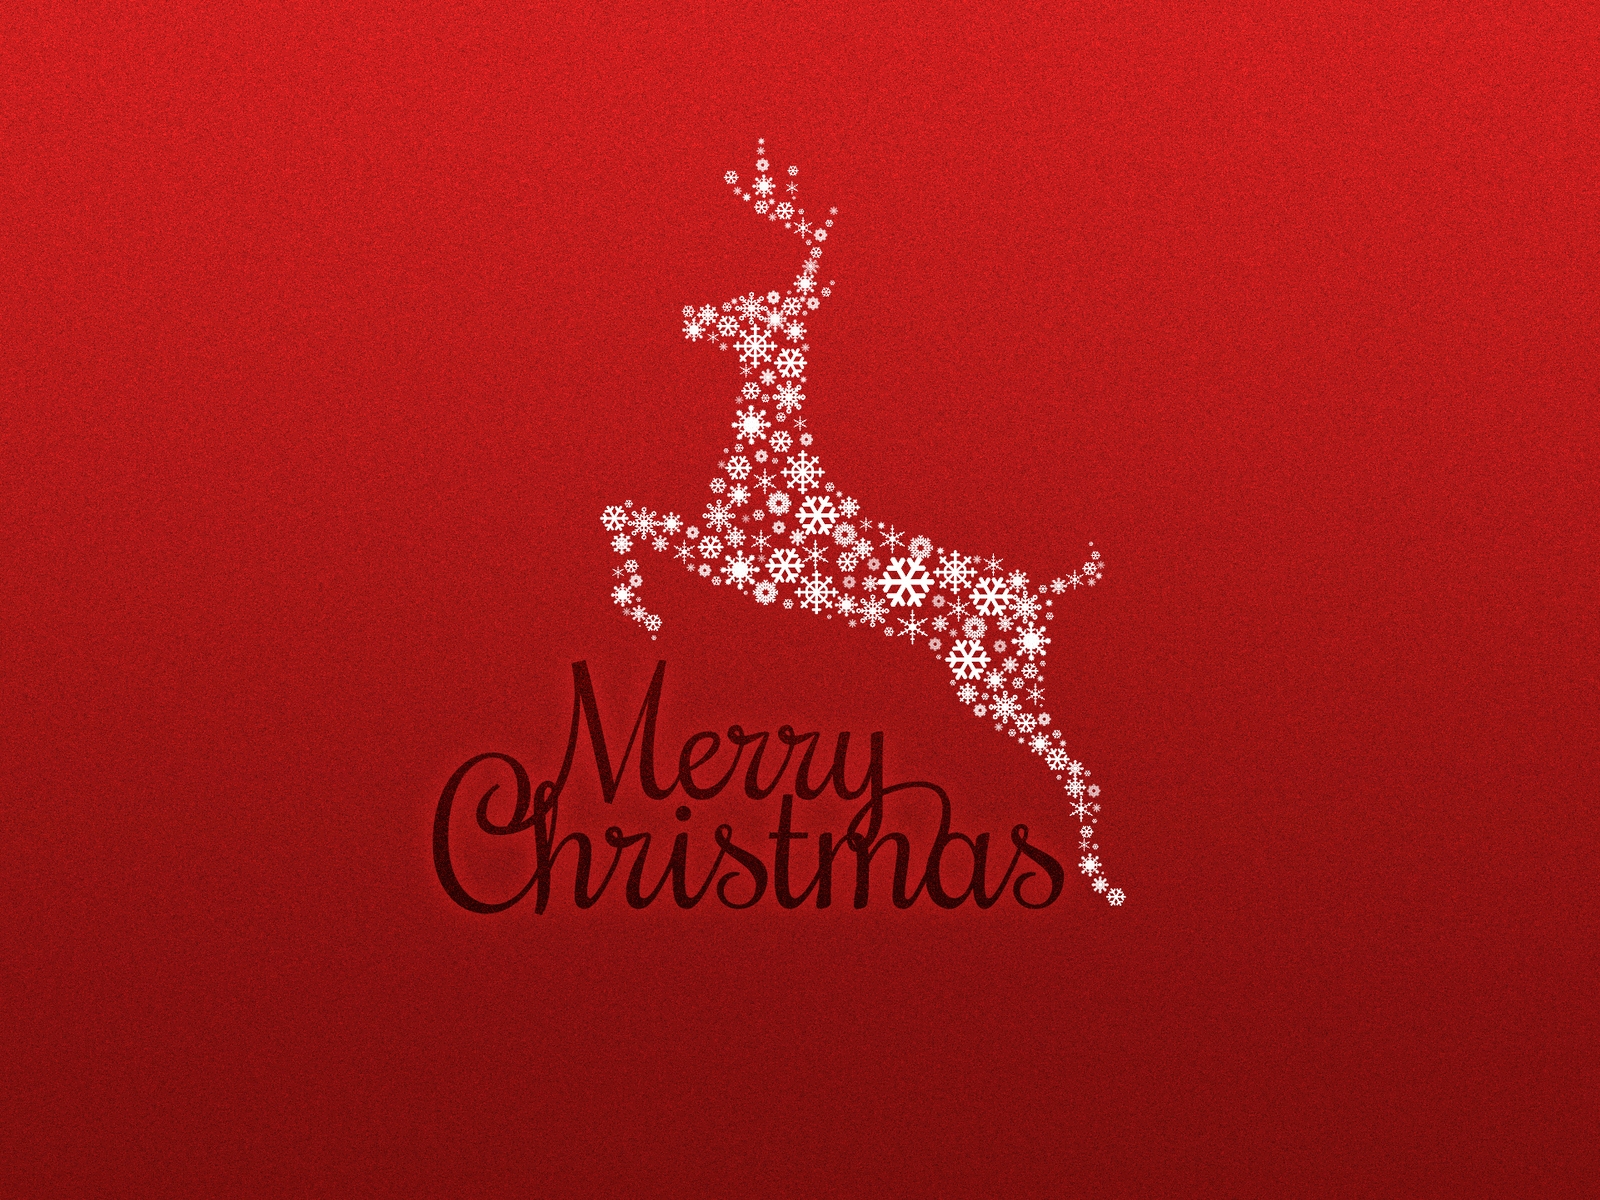 Merry Christmas Red Card 1600 x 1200 Wallpaper